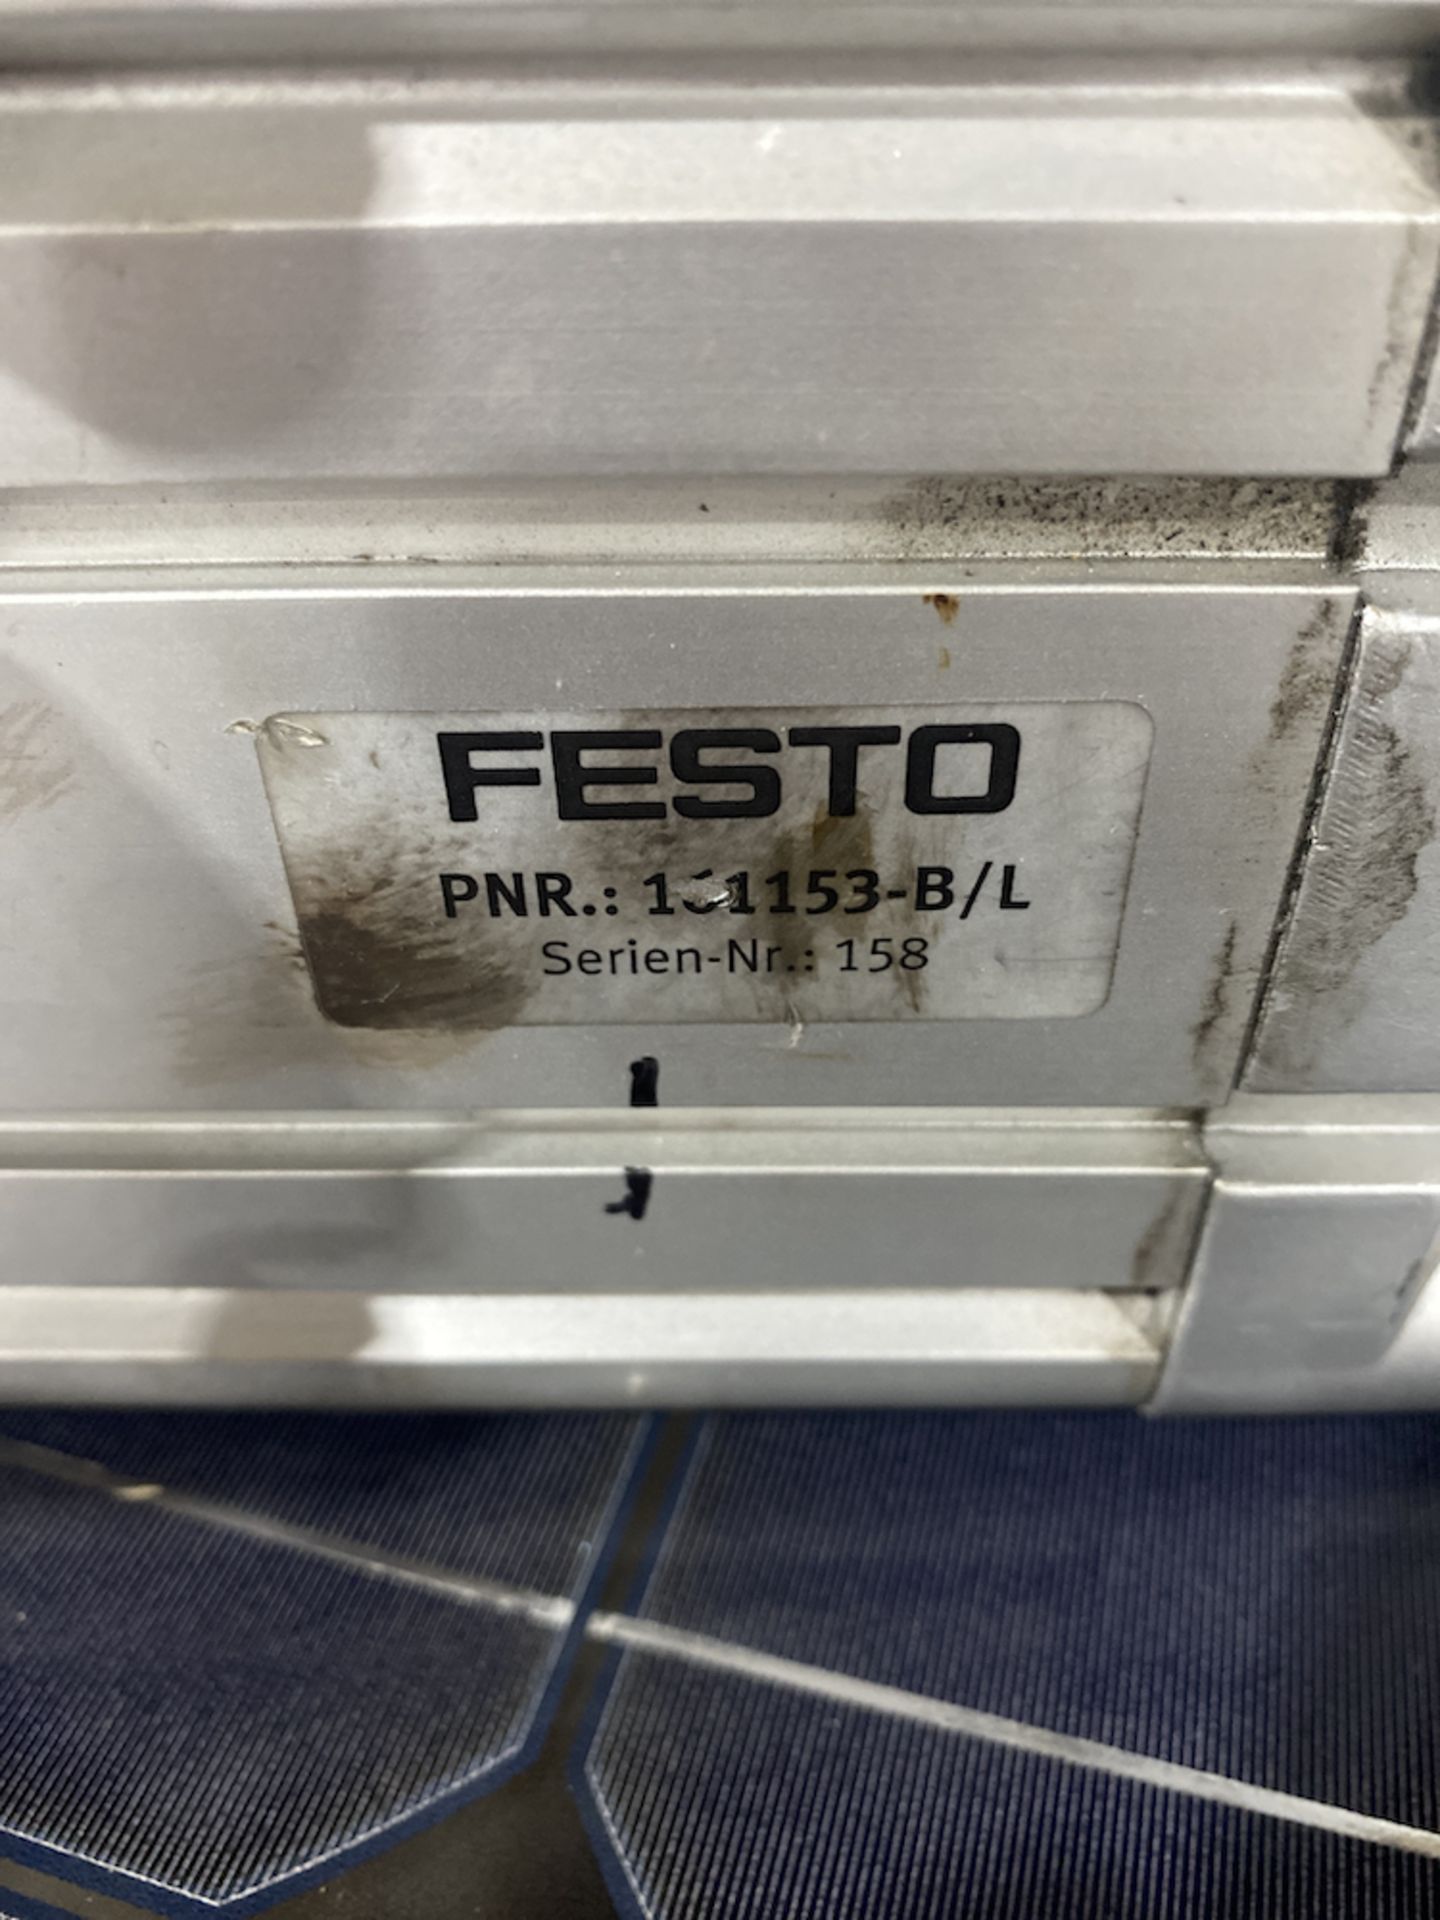 FESTO DNC-100-160-PPV-A PNEUMATIC CYLINDER - Image 4 of 5